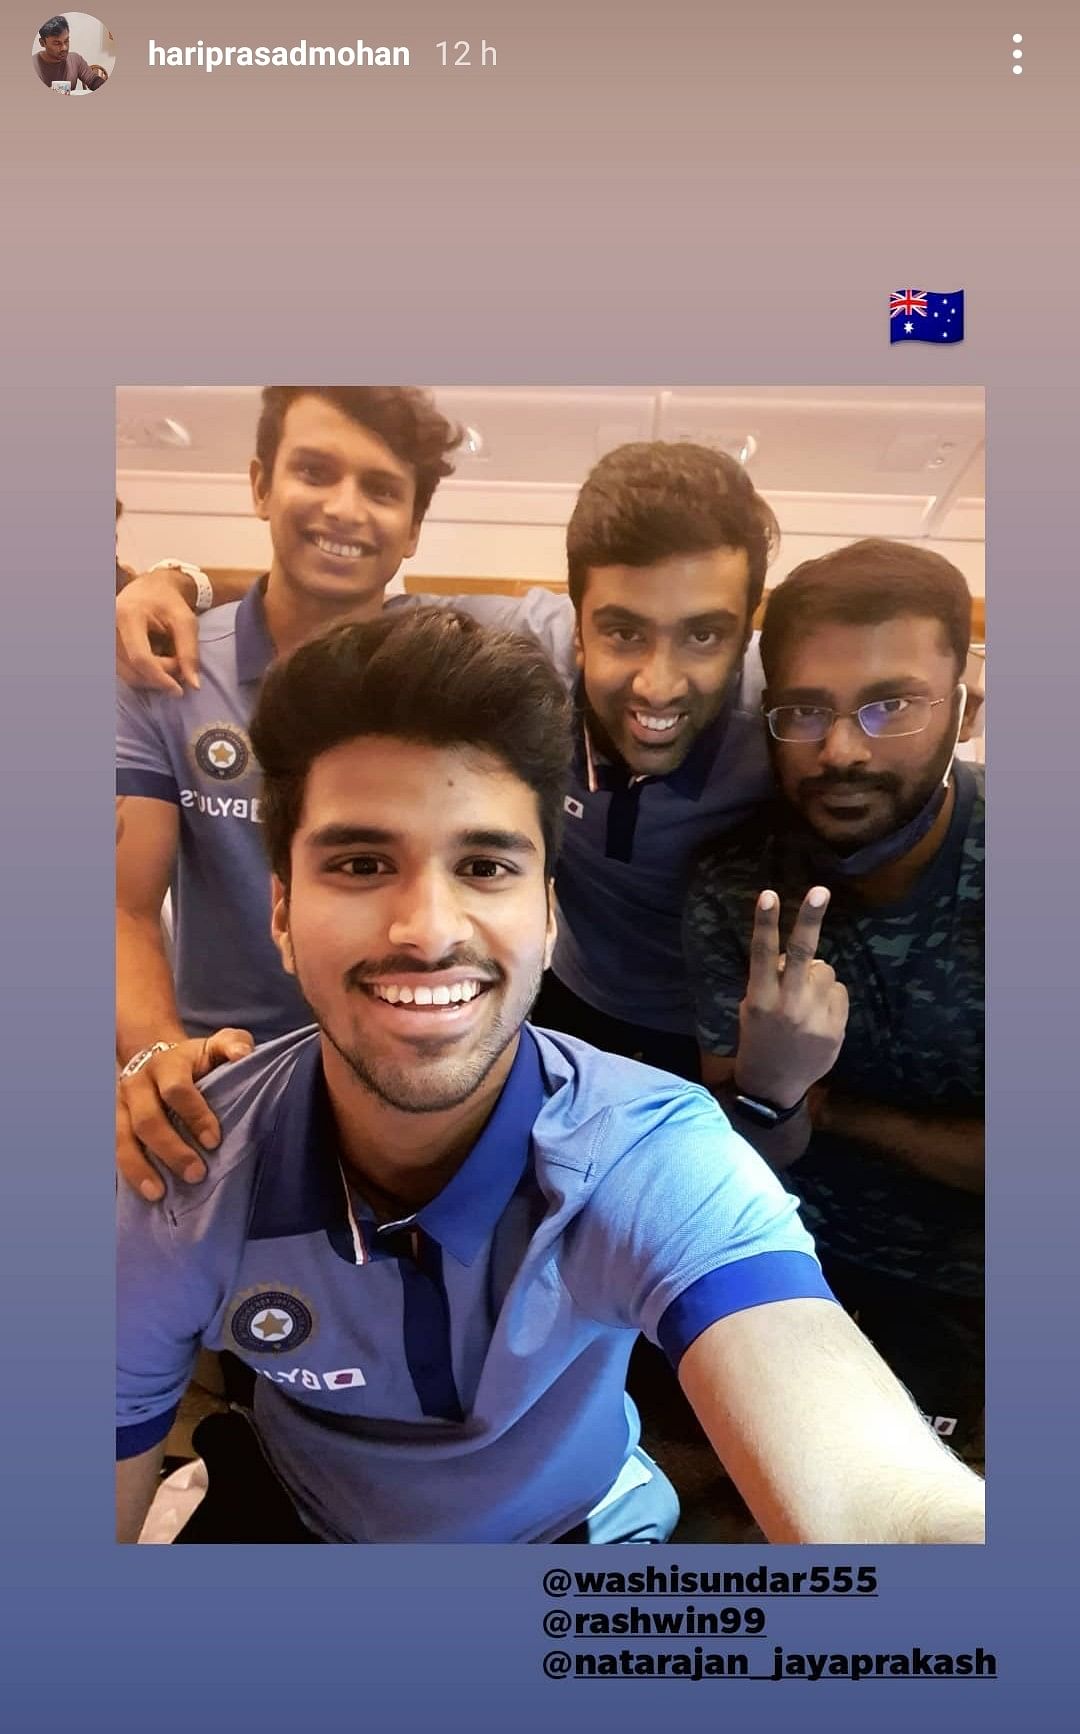 Team India members posted about their departure for Australia on national duty after 3 months of tough IPL cricket.